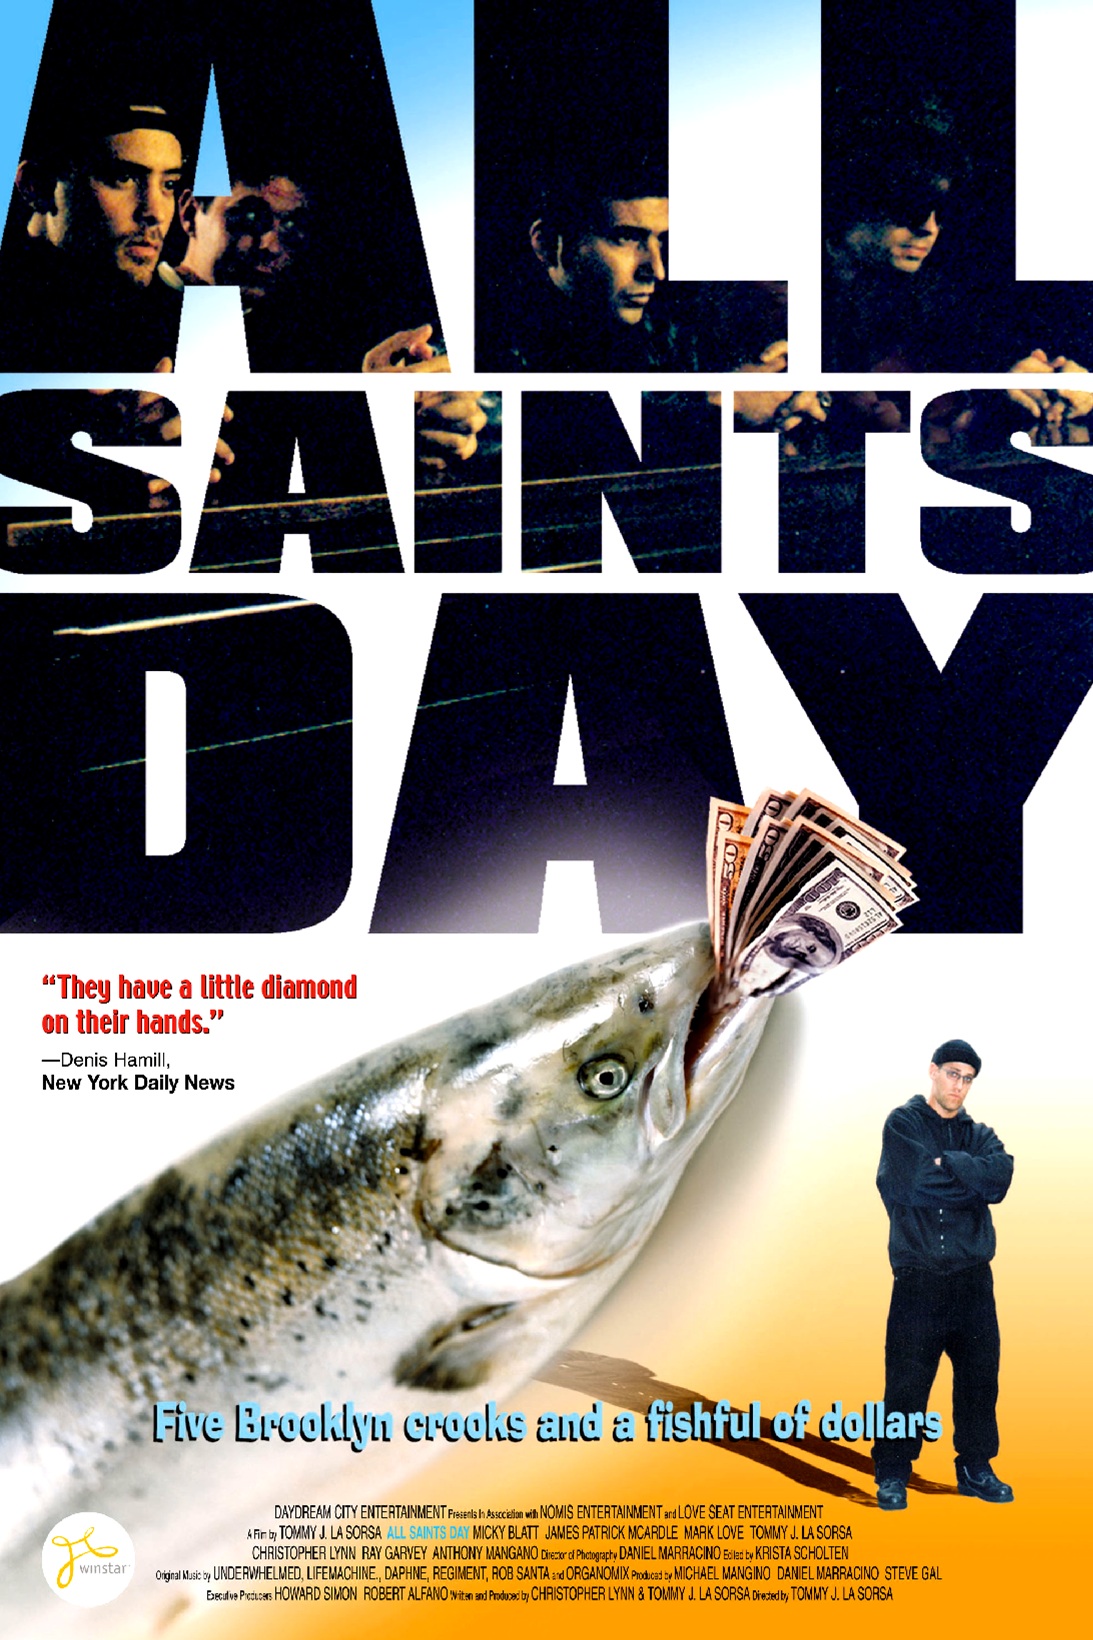 ALL SAINTS DAY